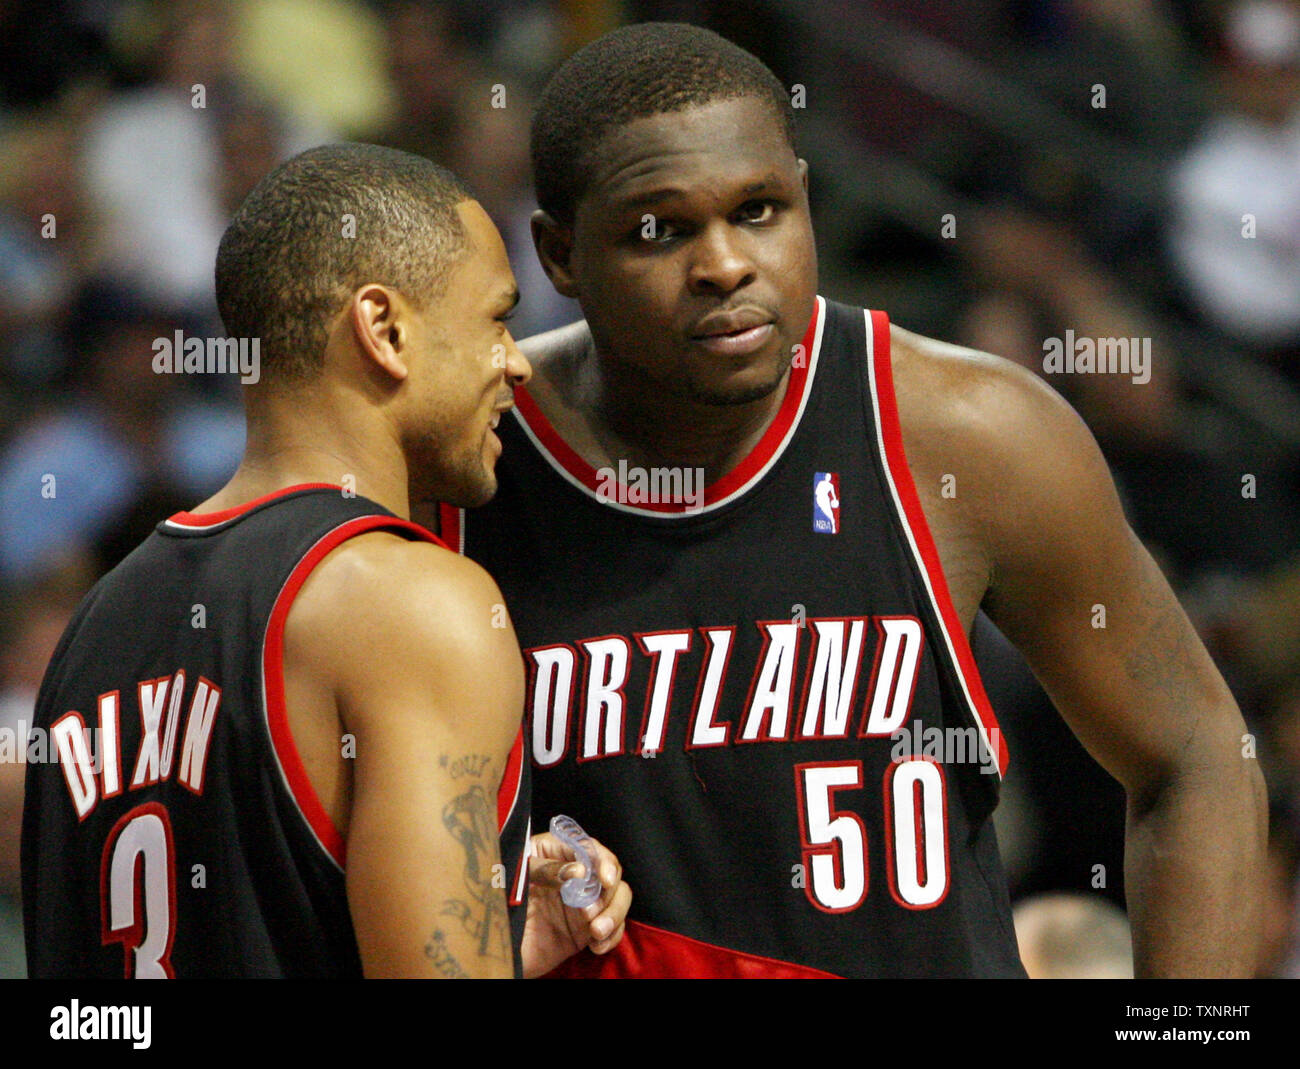 Portland Trail Blazers Juan Dixon (3) talks with teammate Zach Randolph (50) during a timeout in the third quarter against the Detroit Pistons at The Palace of Auburn Hills in Auburn Hills, Michigan on December 5, 2006.  The Trail Blazers defeated the Piston 88-85.  (UPI Photo/Scott R. Galvin) Stock Photo